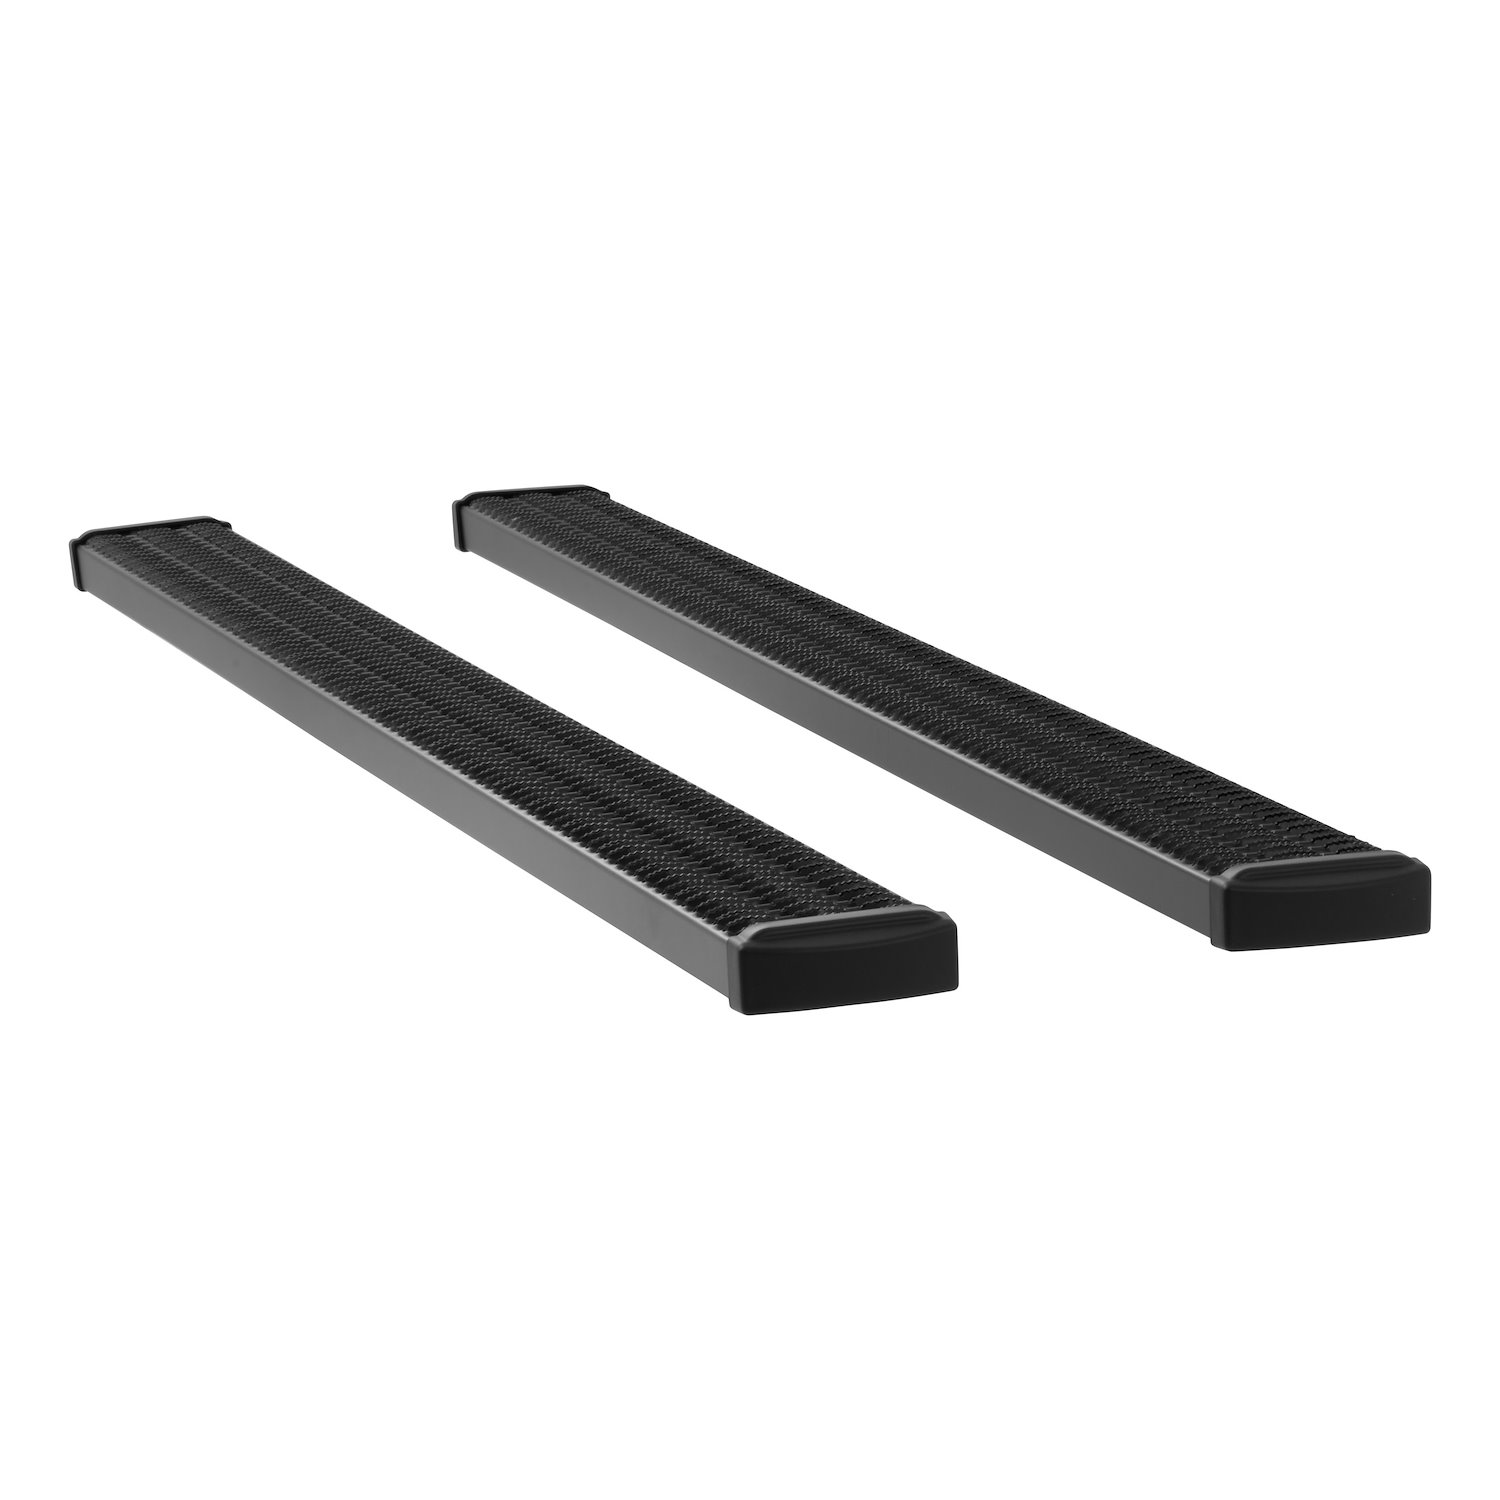 415102-401339 Grip Step 7 in. x 102 in. Aluminum Wheel-to-Wheel Running Boards Fits Select Ram 3500